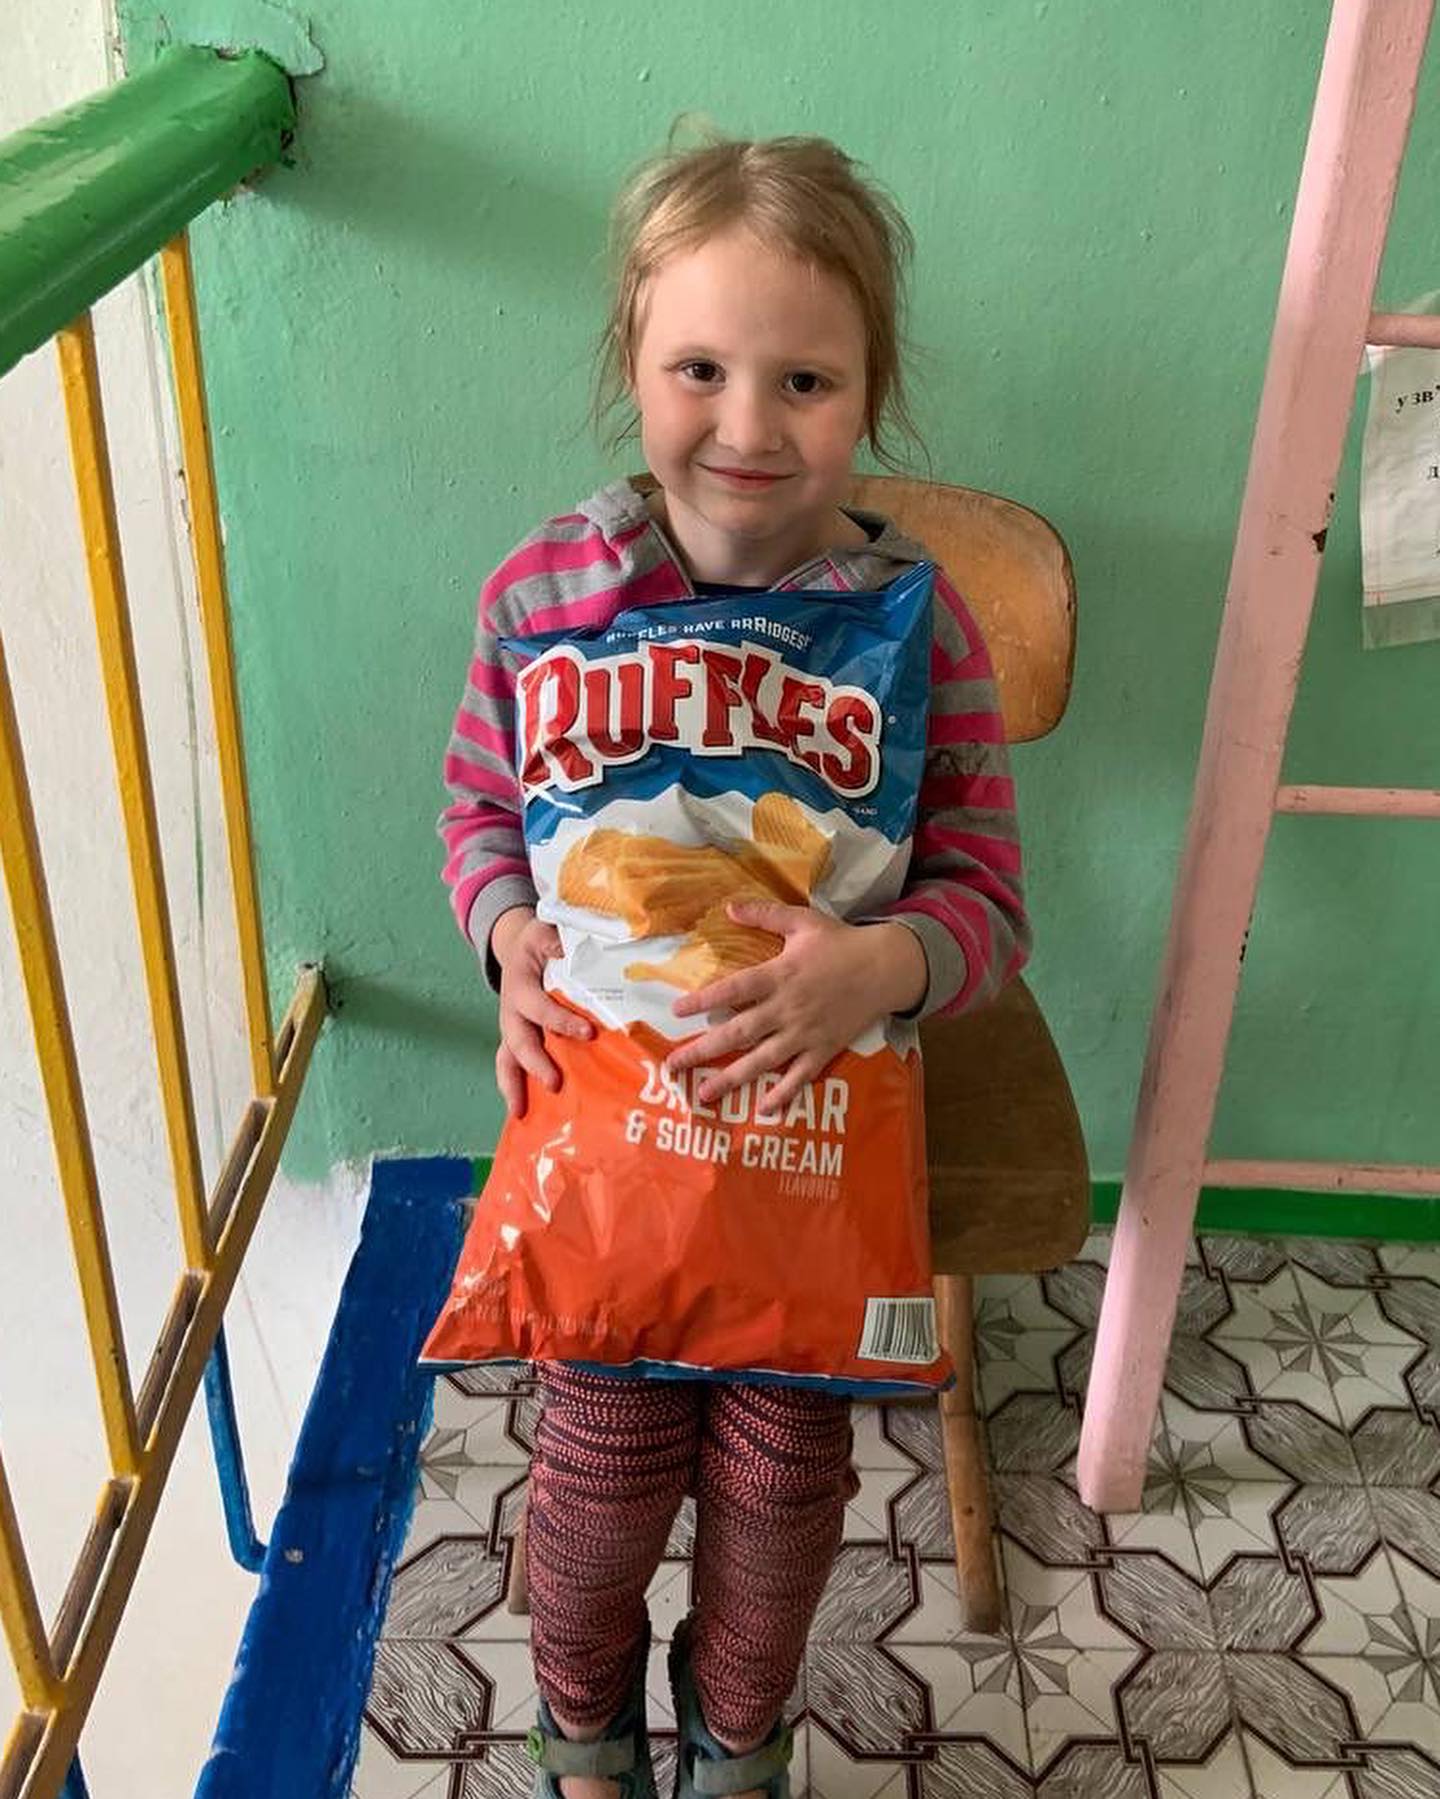 a little girl sitting on a chair holding a bag of doritos.